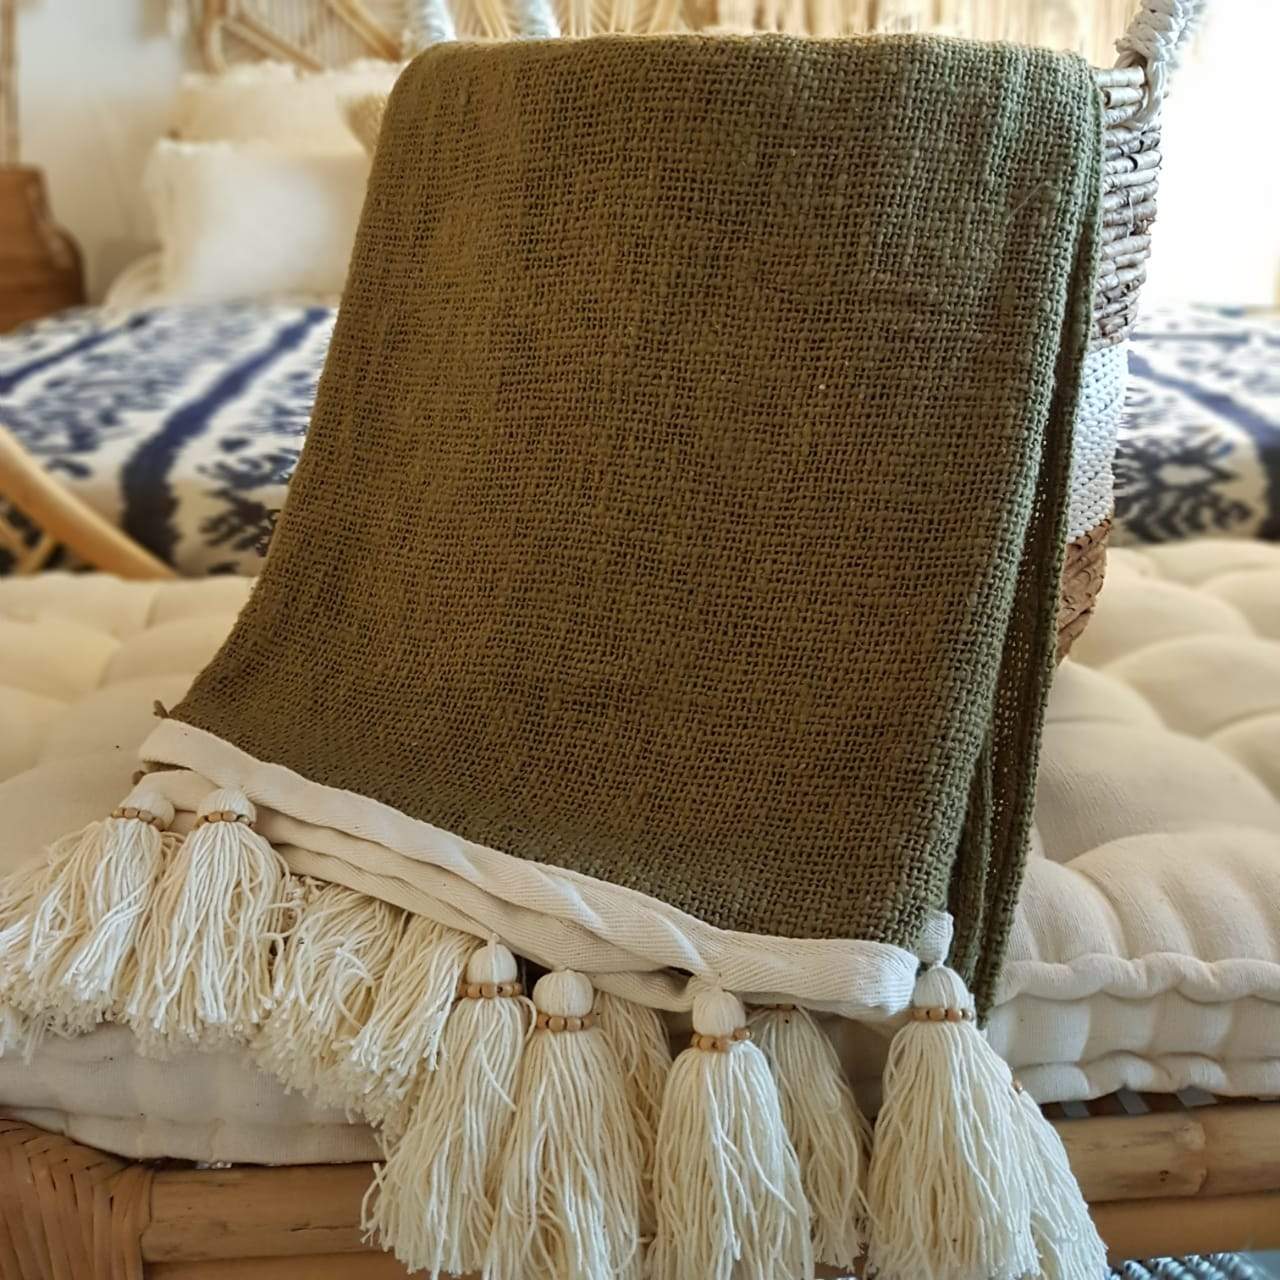 Gorgeous Forest Green Throw Blanket With Beaded Tassels - bohemian-beach-house